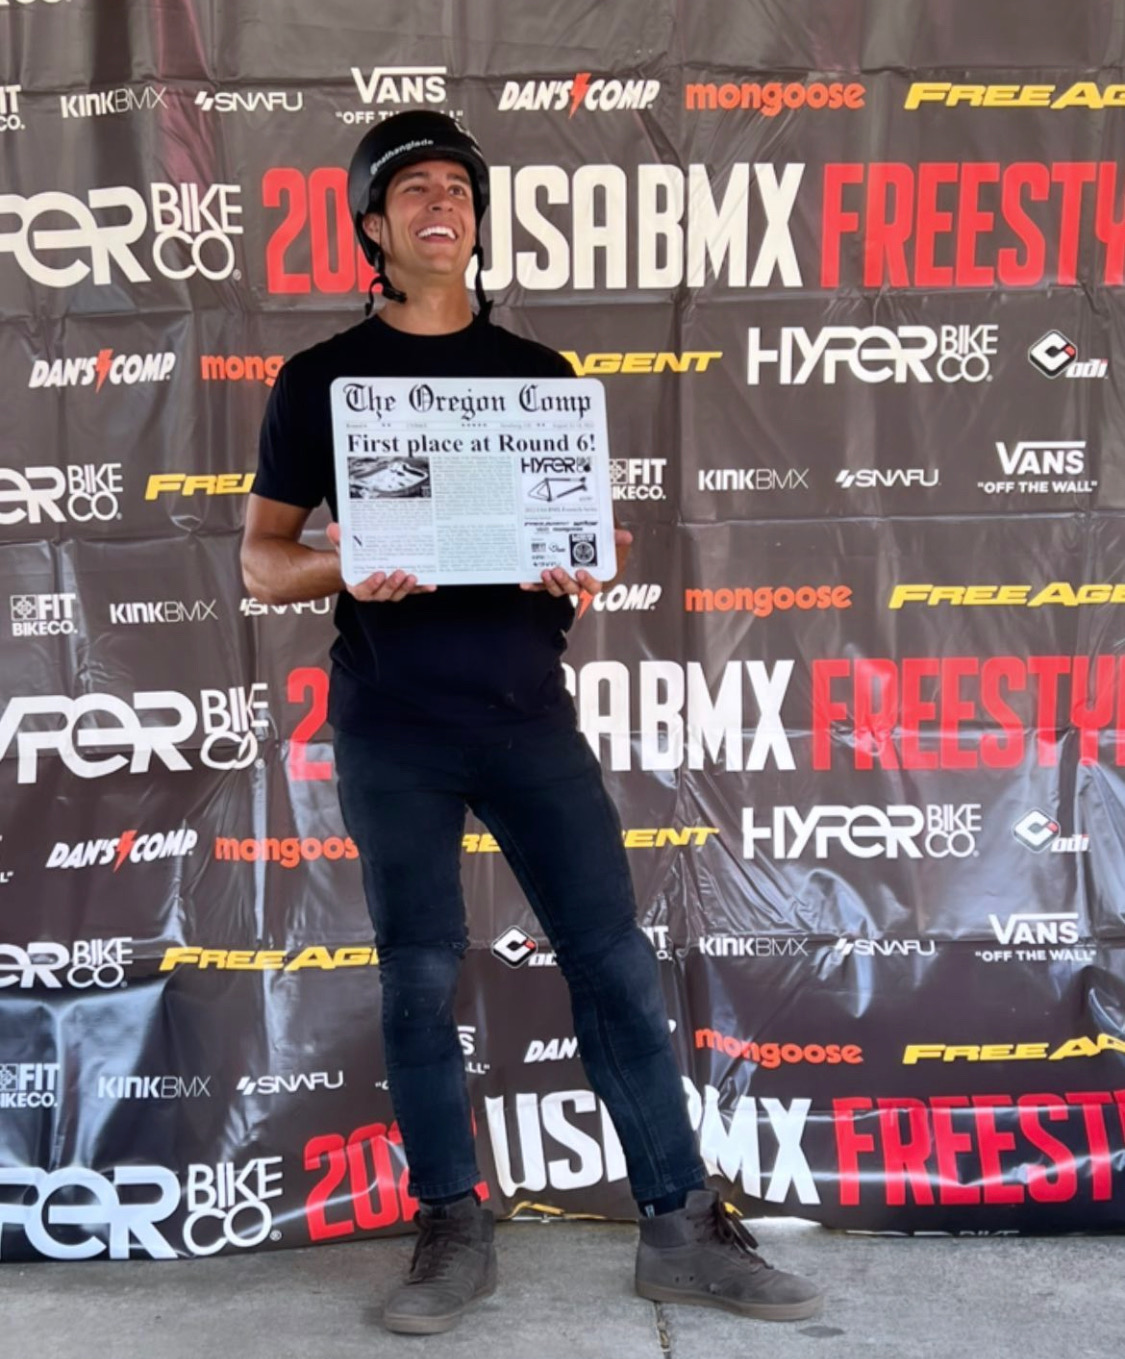 Nathan Glade takes 1stP lace at Free Agent USA BMX Freestyle Tour in Oregon